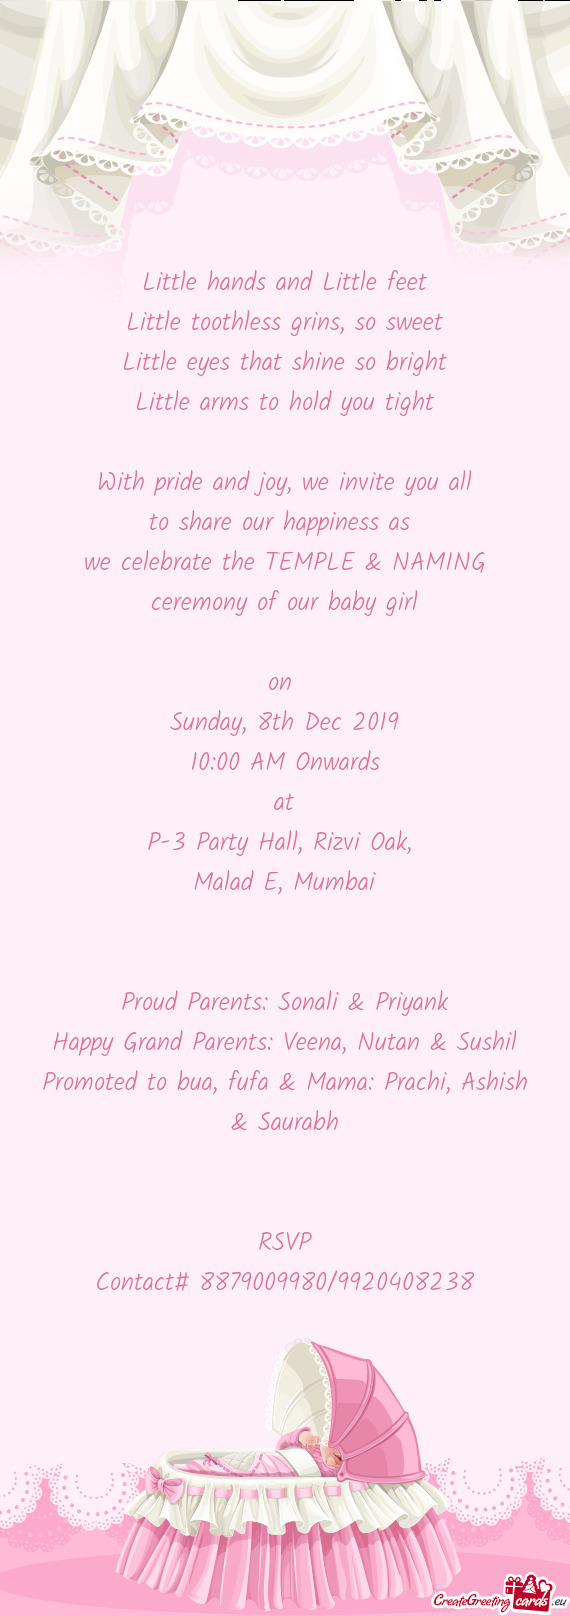 We celebrate the TEMPLE & NAMING